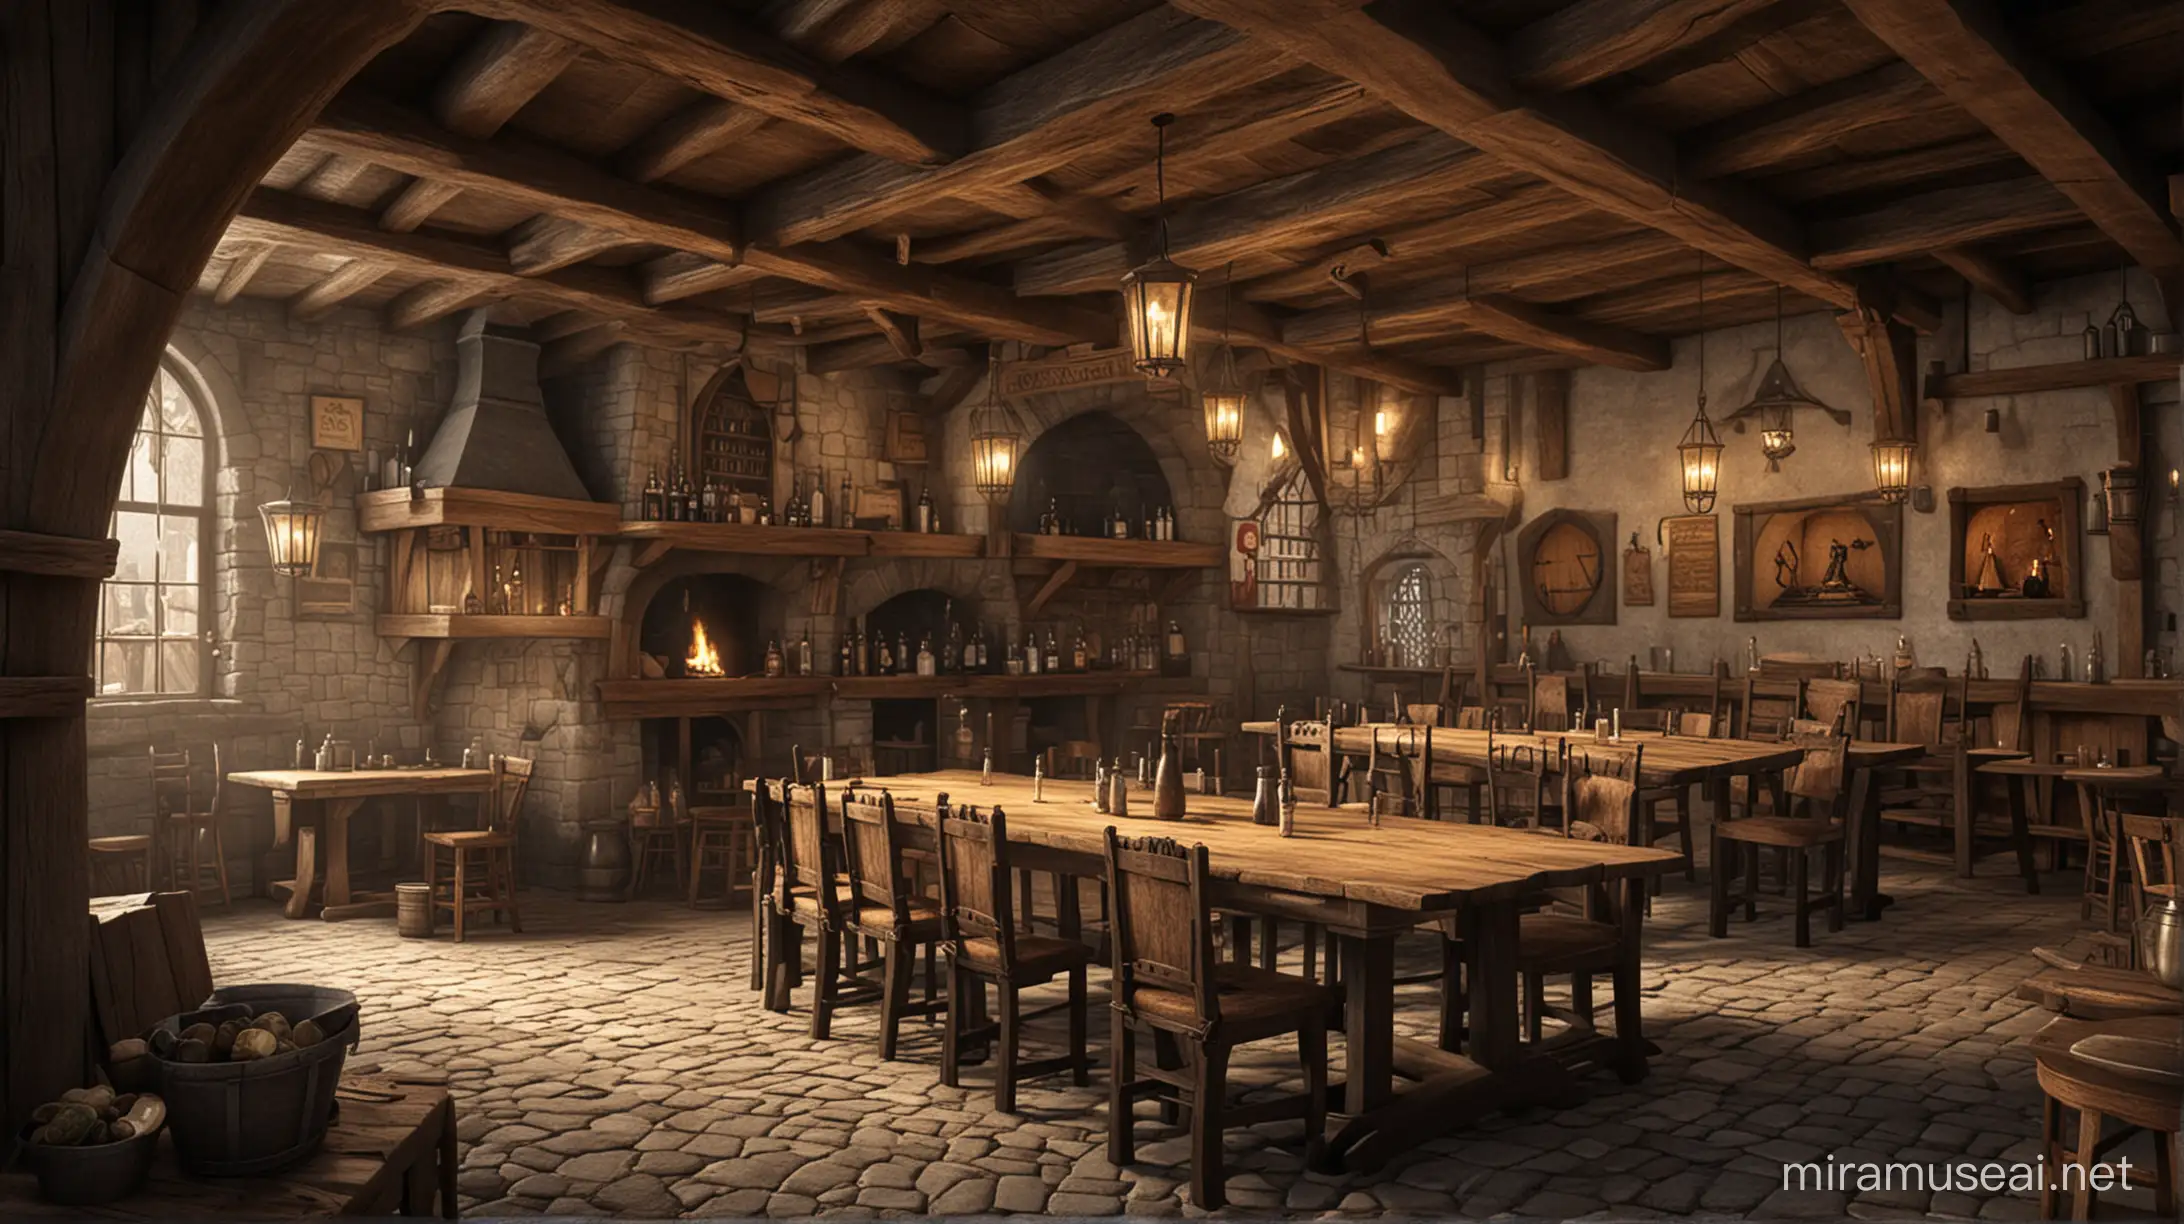 Medieval Tavern Scene with Rustic Characters Enjoying Ale and Merriment